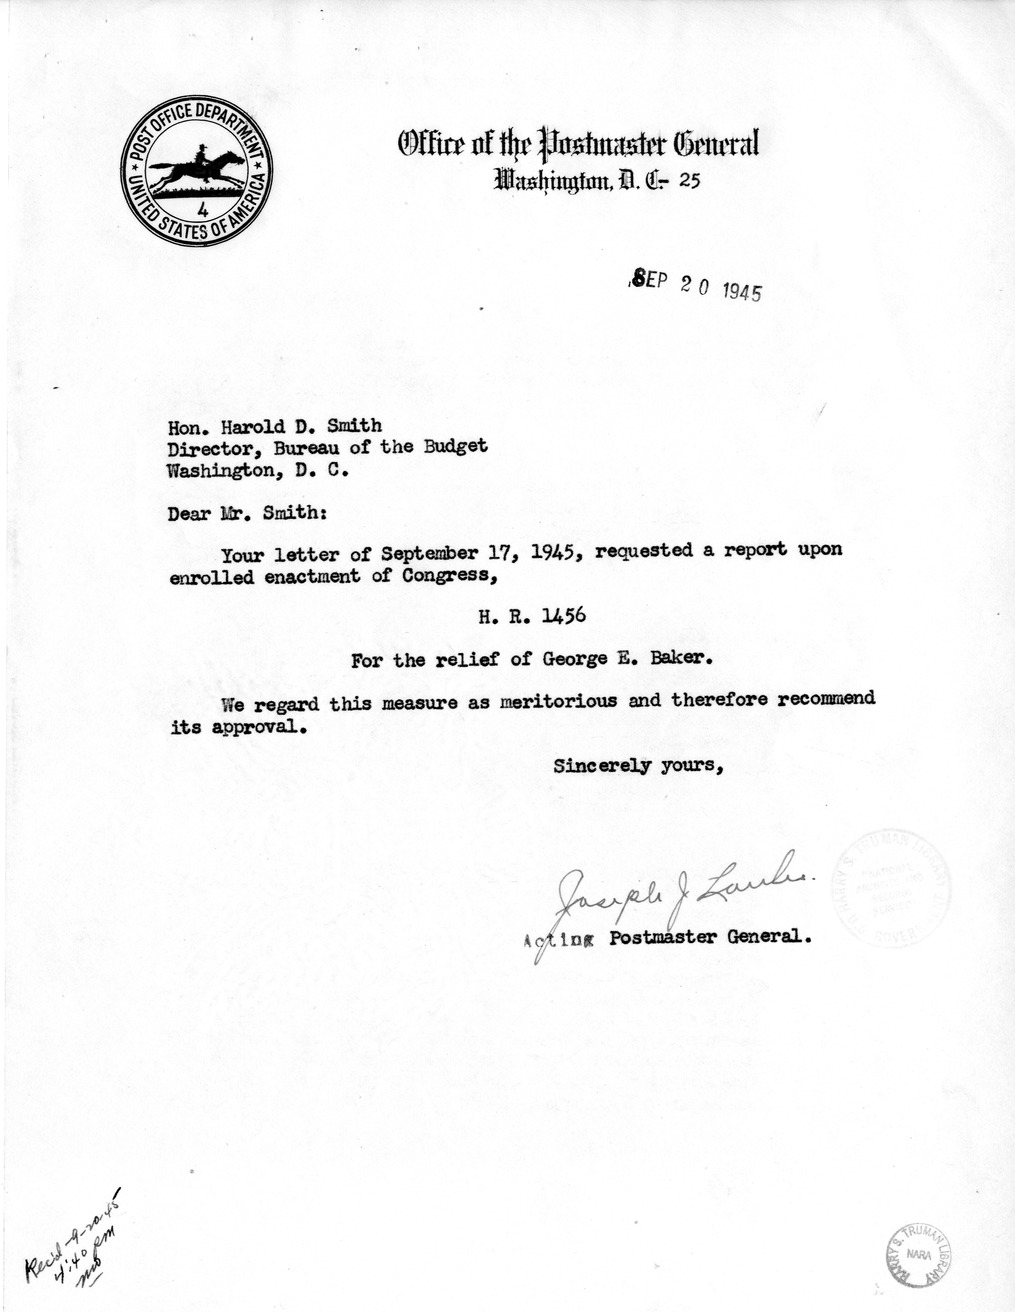 Memorandum from Frederick J. Bailey to M. C. Latta, H.R. 1456, for the Relief of George E. Baker, with Attachments